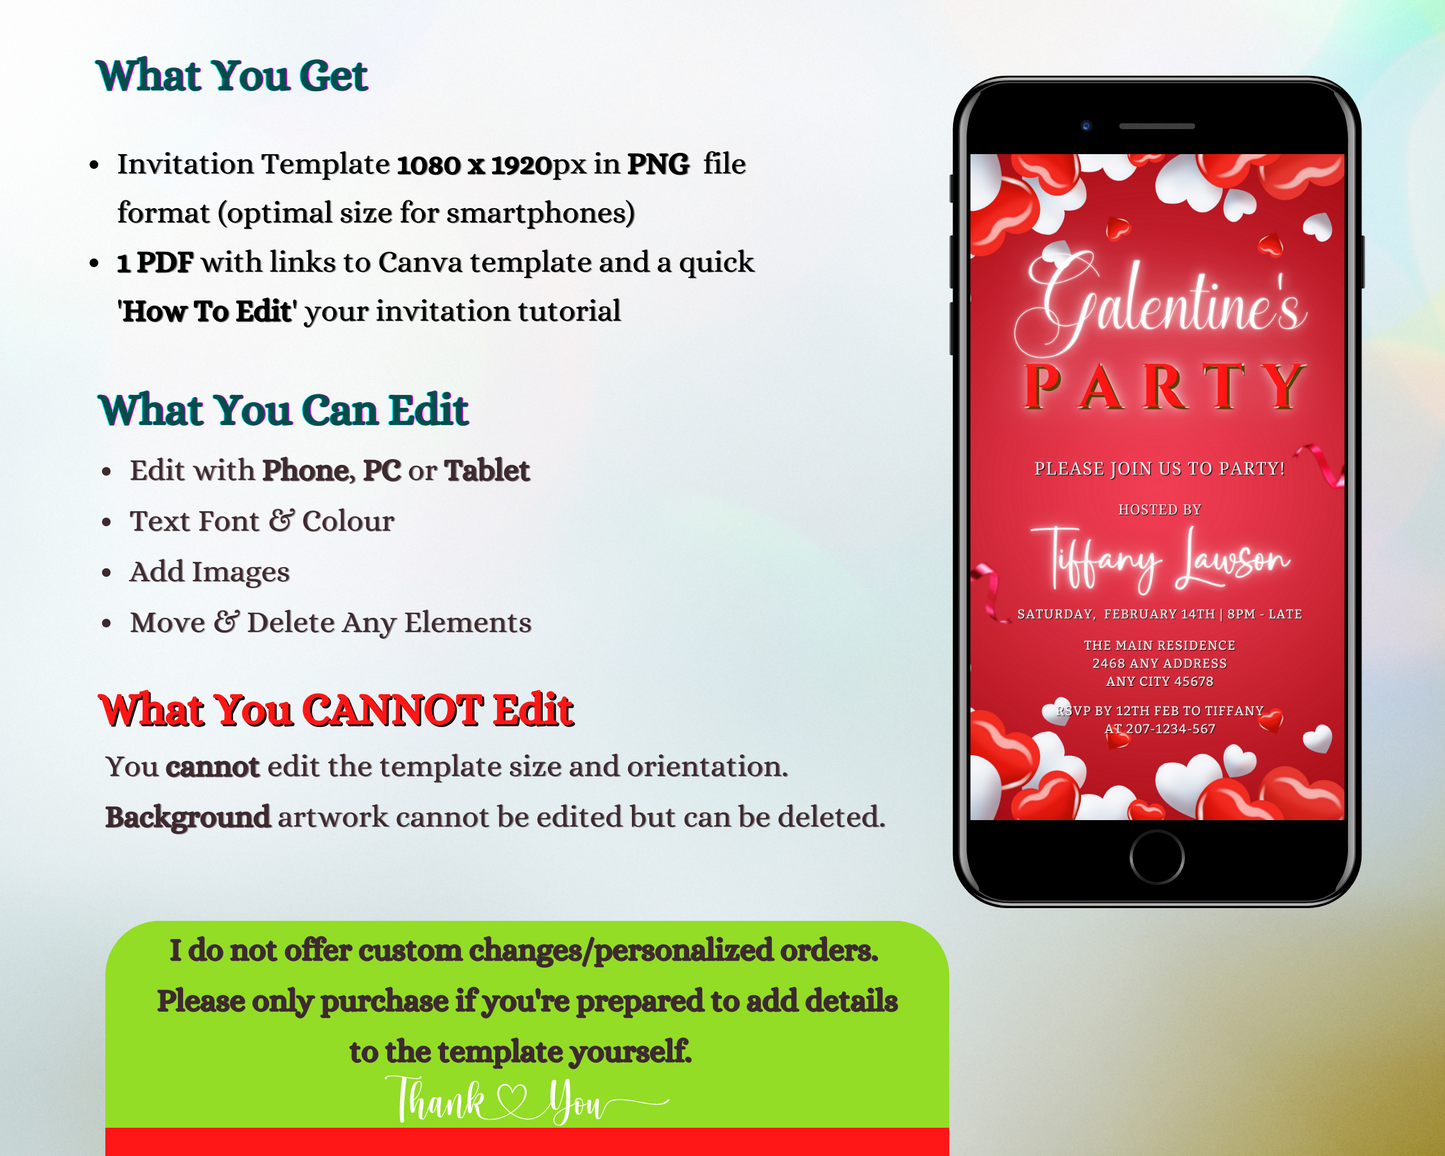 Cell phone displaying the customizable Red White Boarder Hearts | Galentines Party Evite digital invitation template.